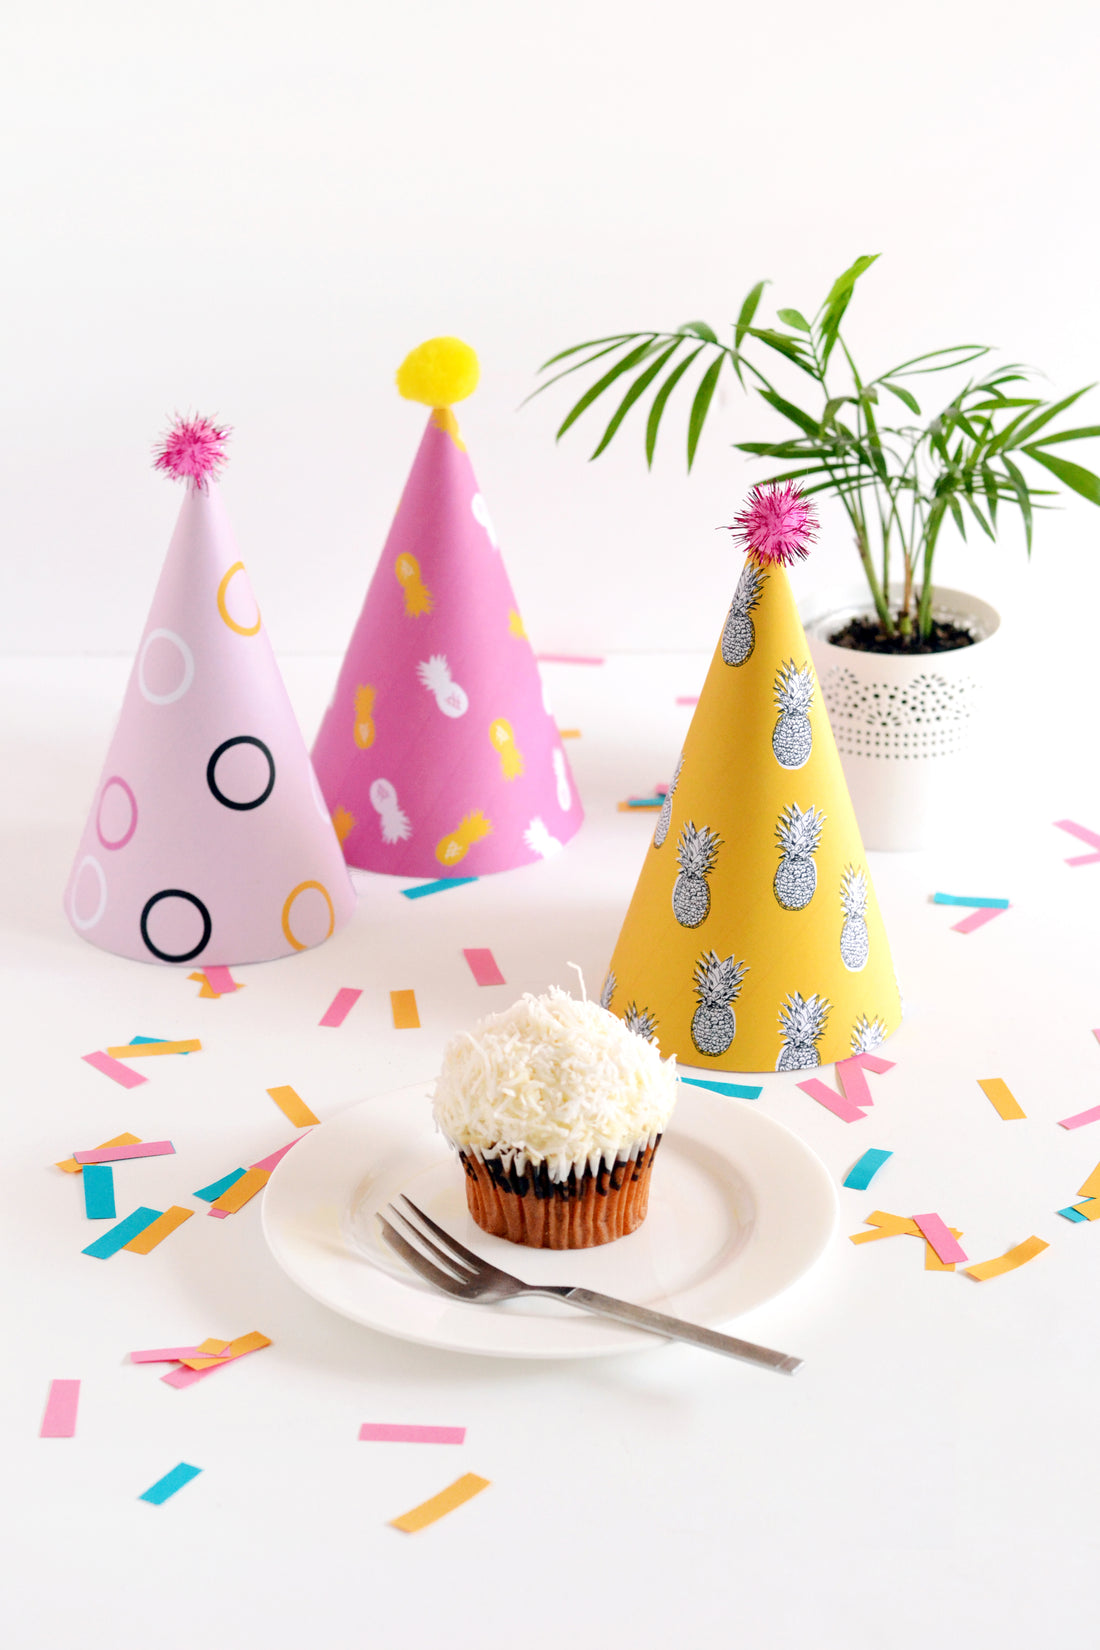 The blog turns 2 and printable pineapple party hats!